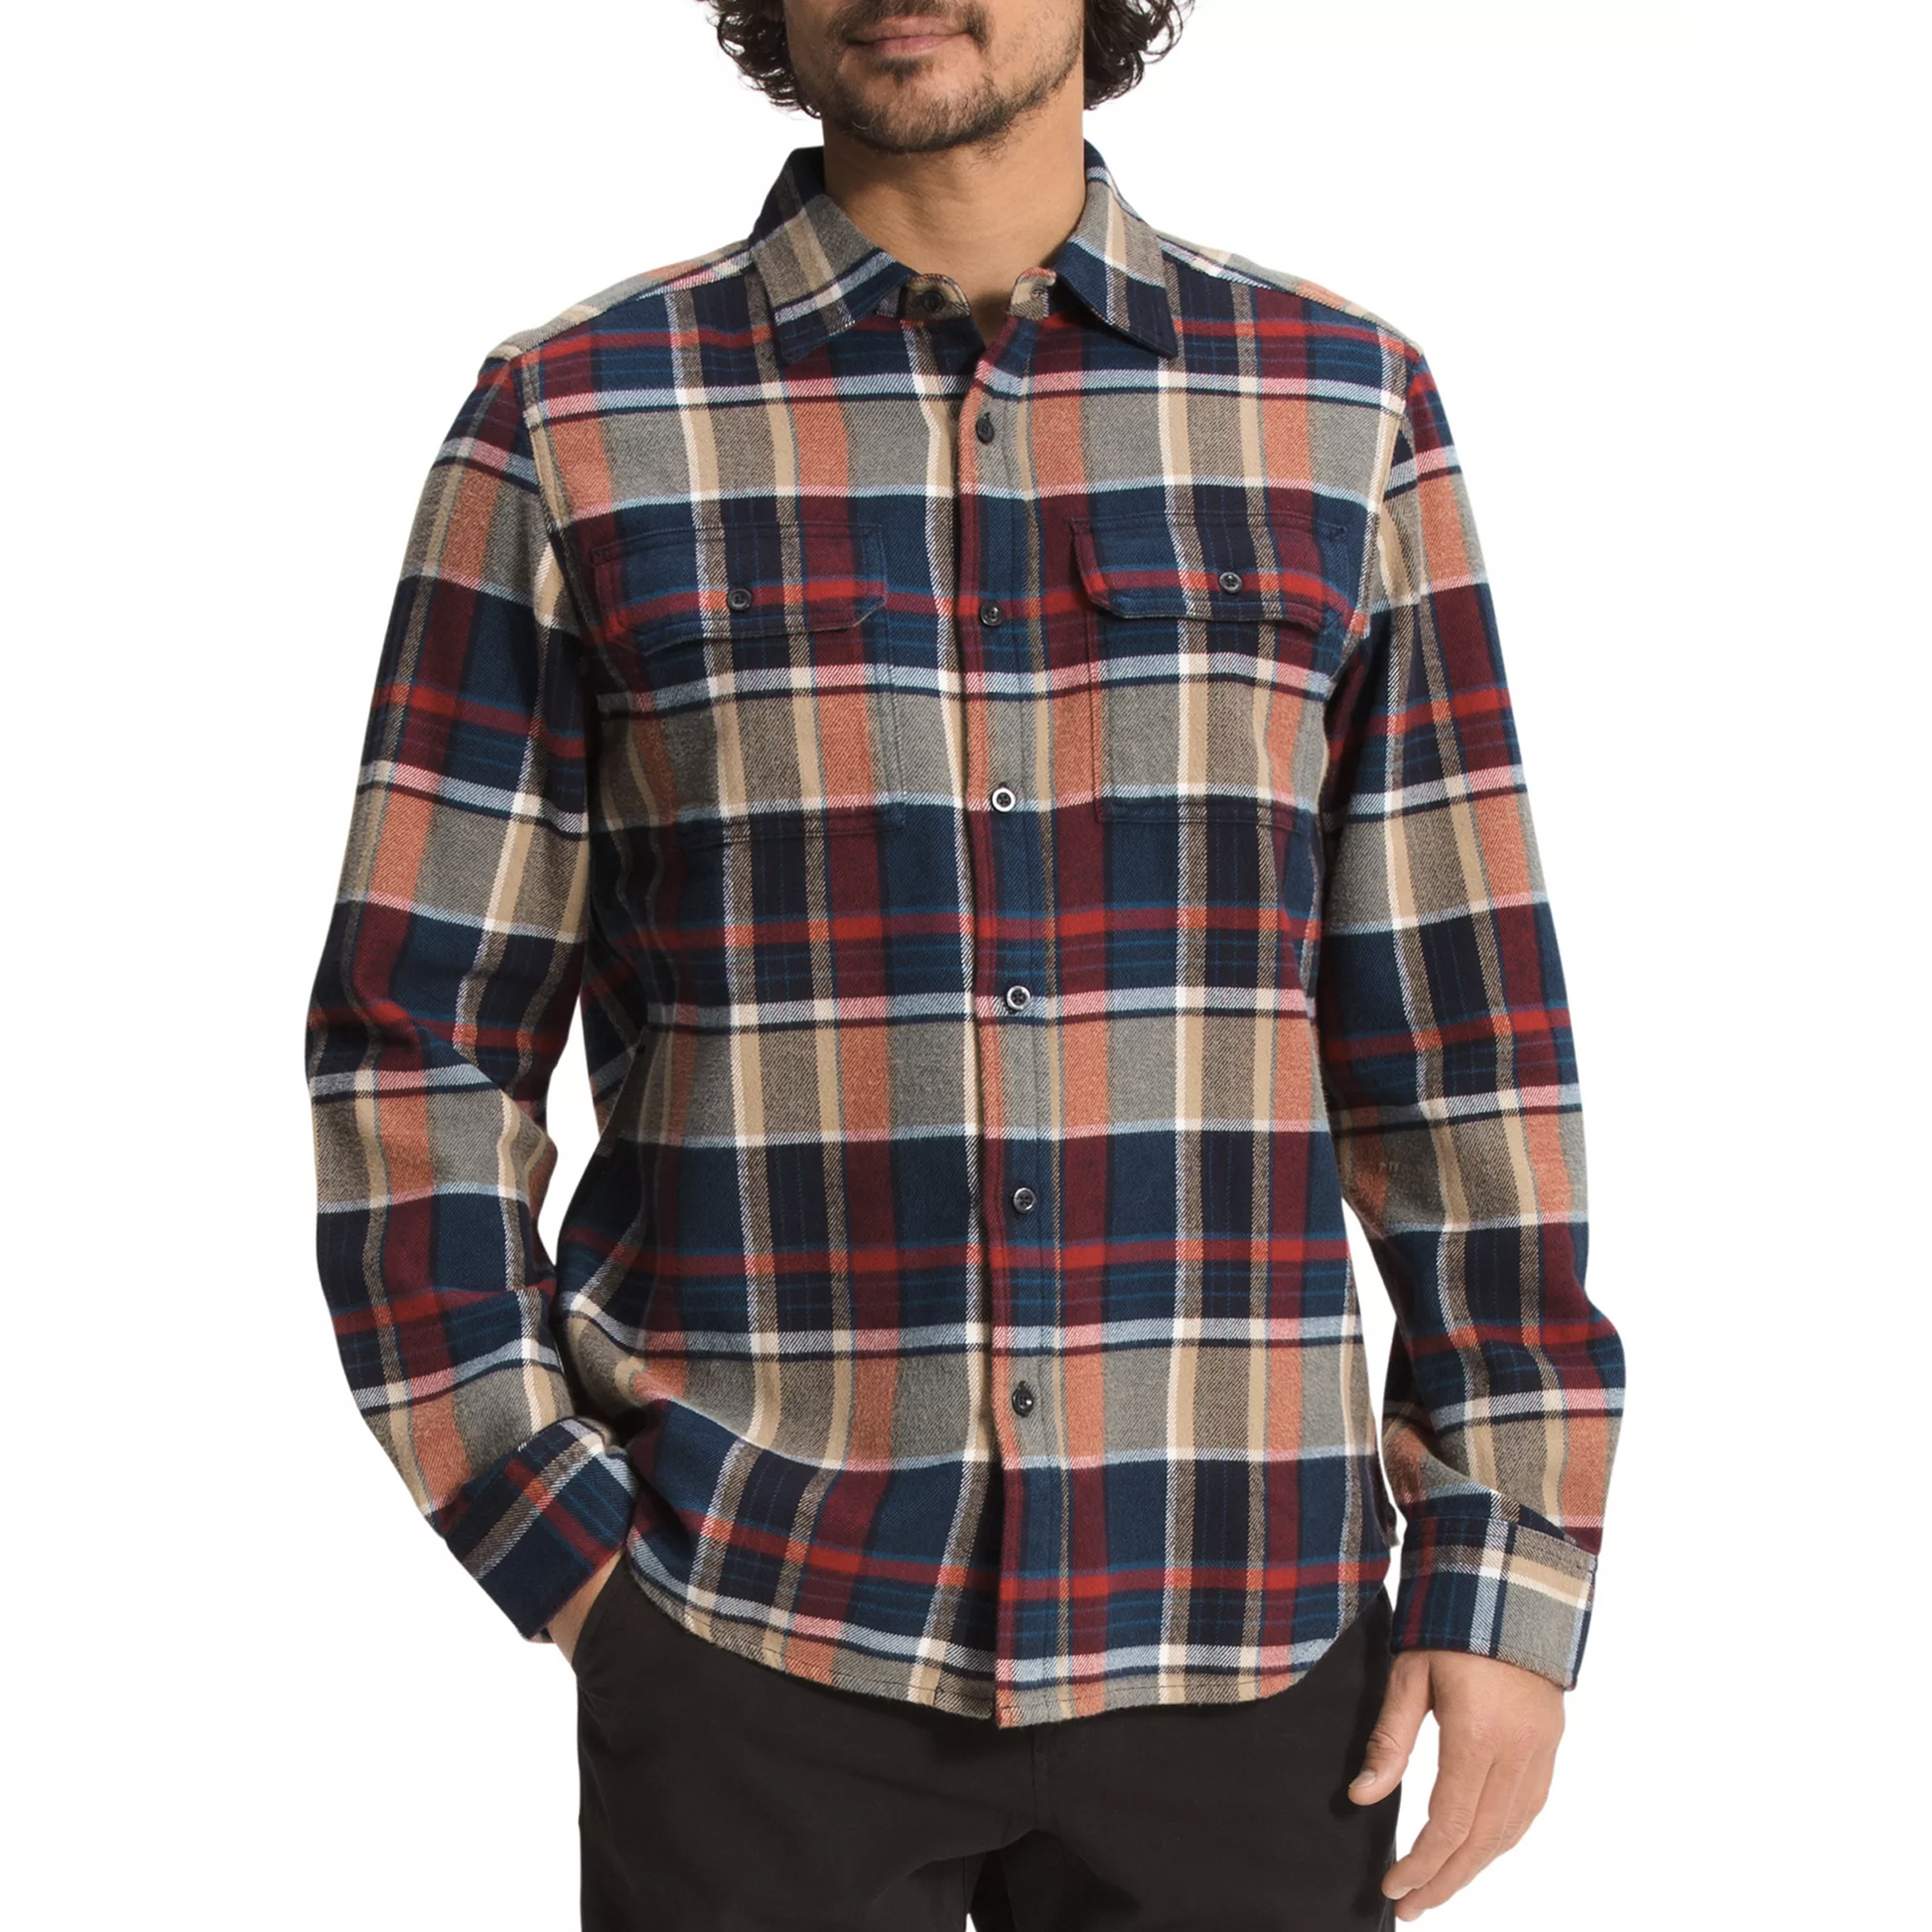 Men's Arroyo Flannel Shirt Big Adventure Outfitters